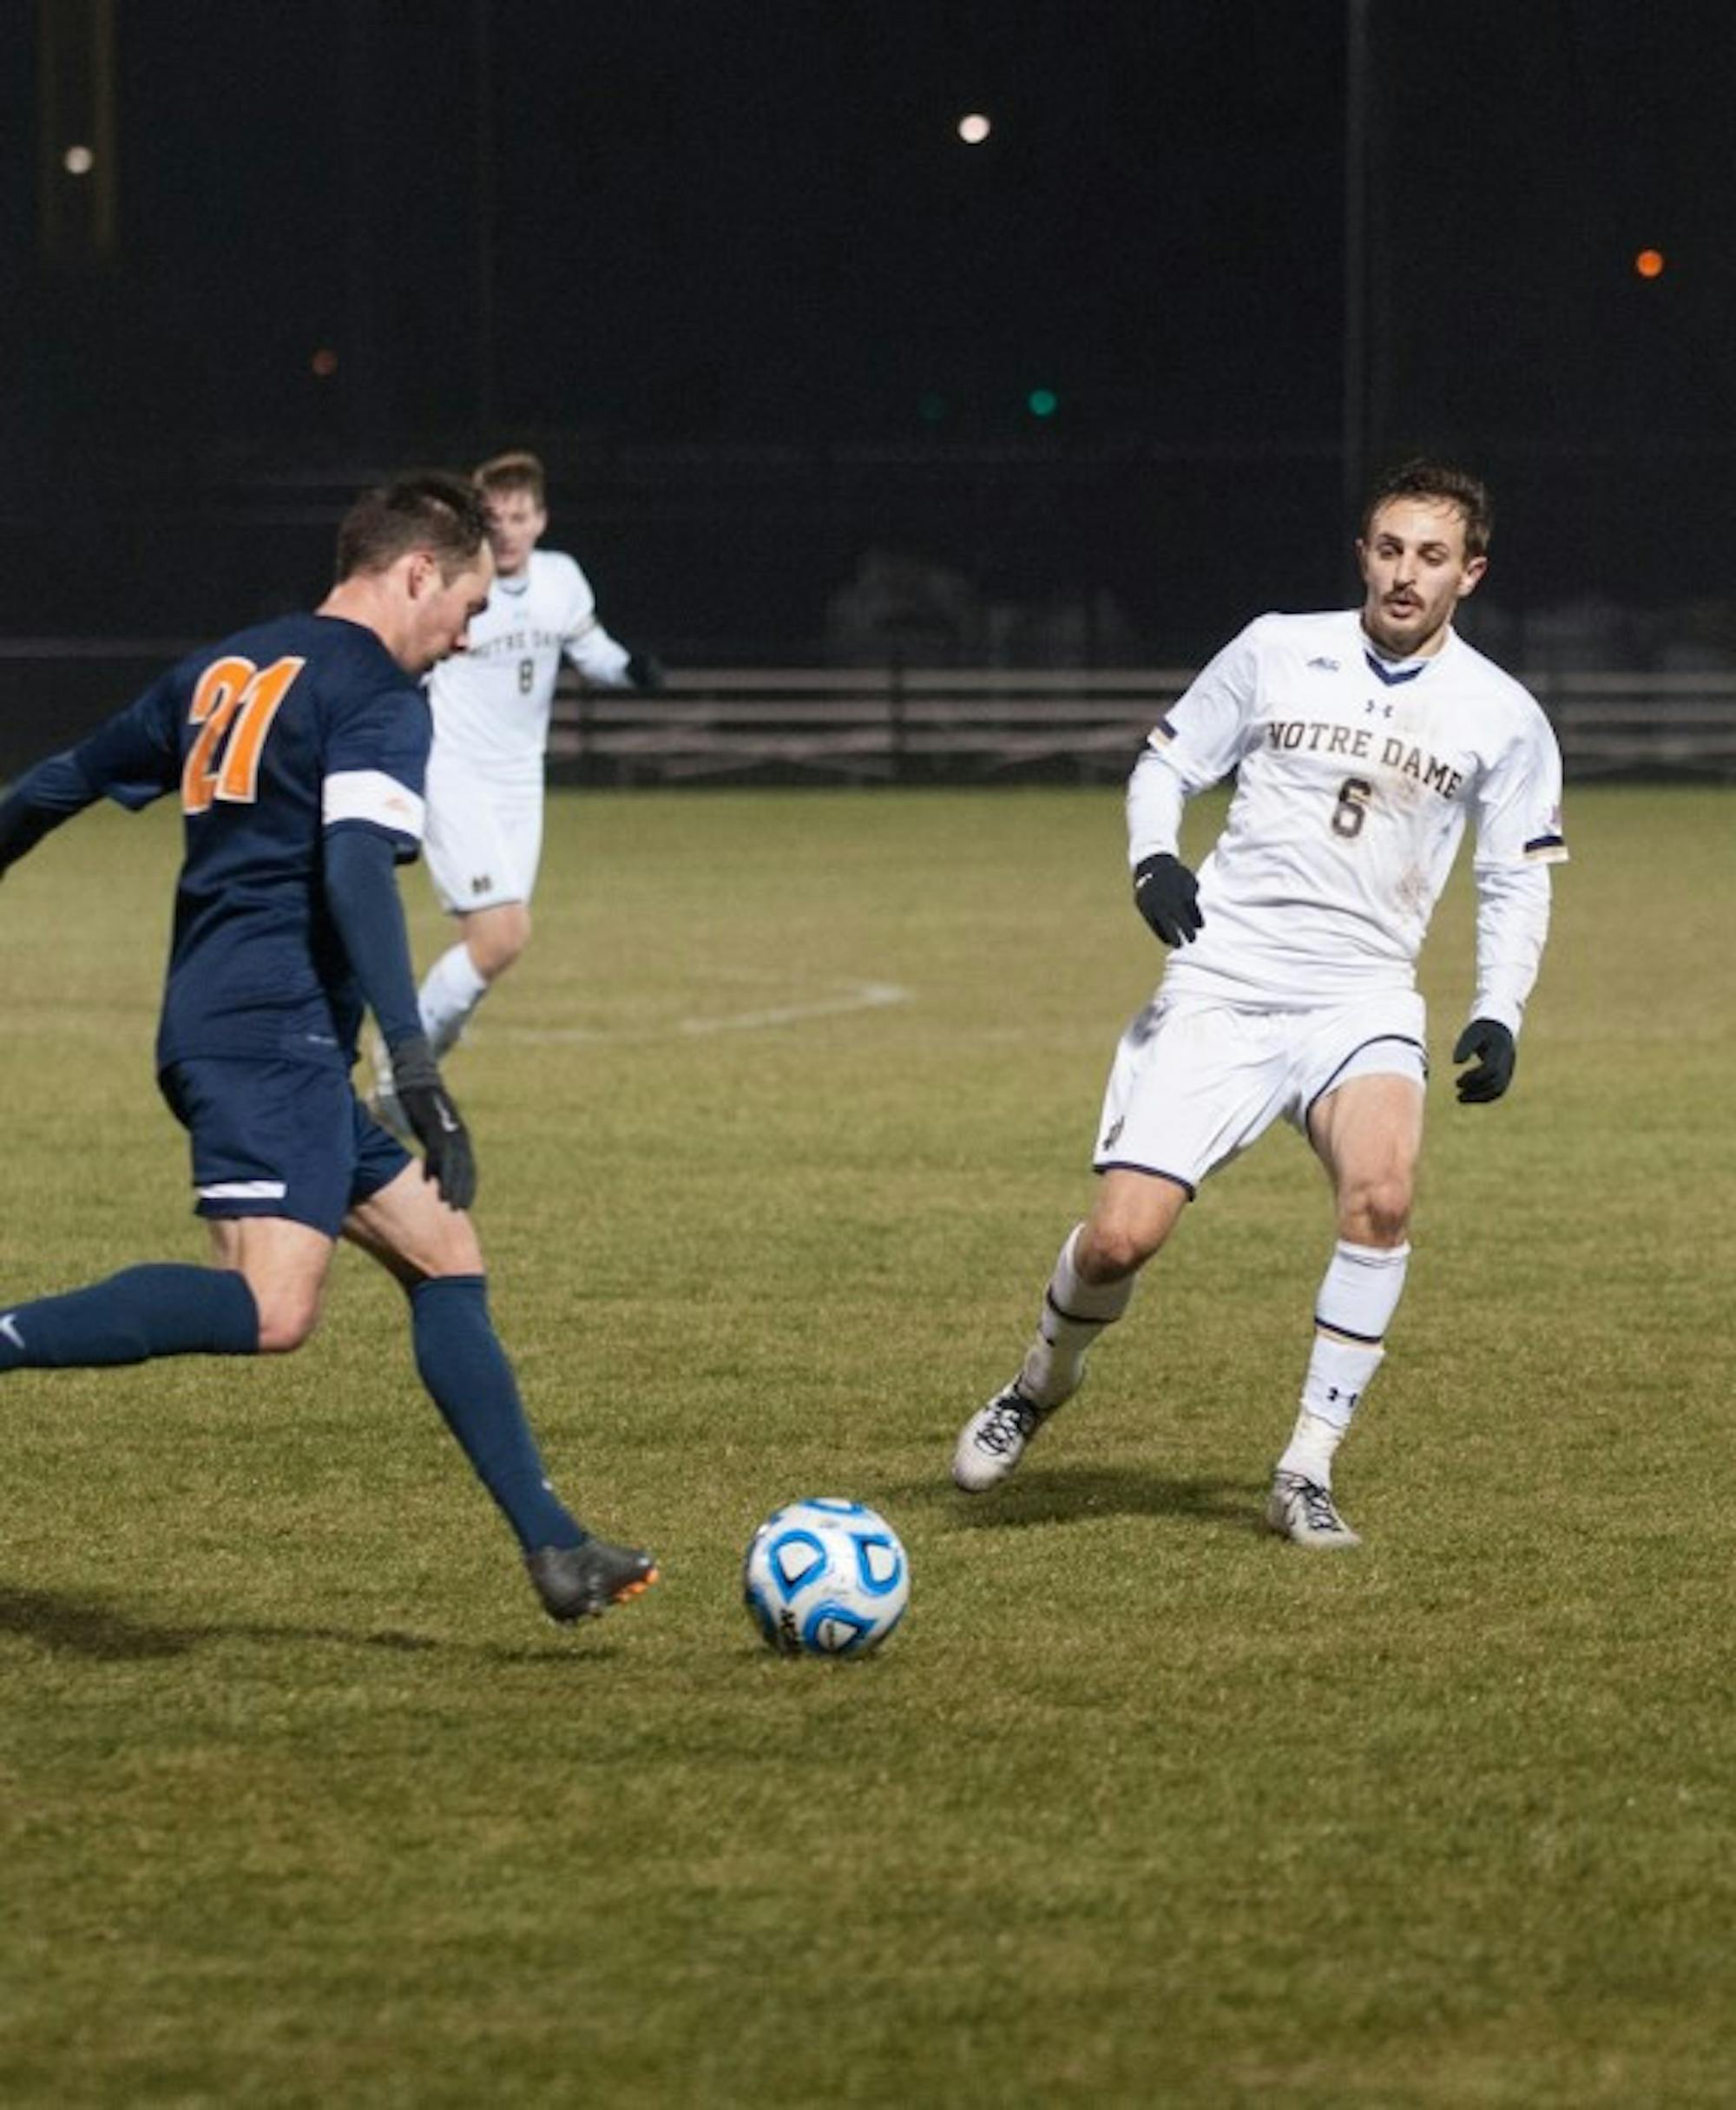 Senior Irish defender Max Lachowecki marks his opponent in Notre Dame’s 1-0 loss to Virginia in the third round of the NCAA Championships on November 30.